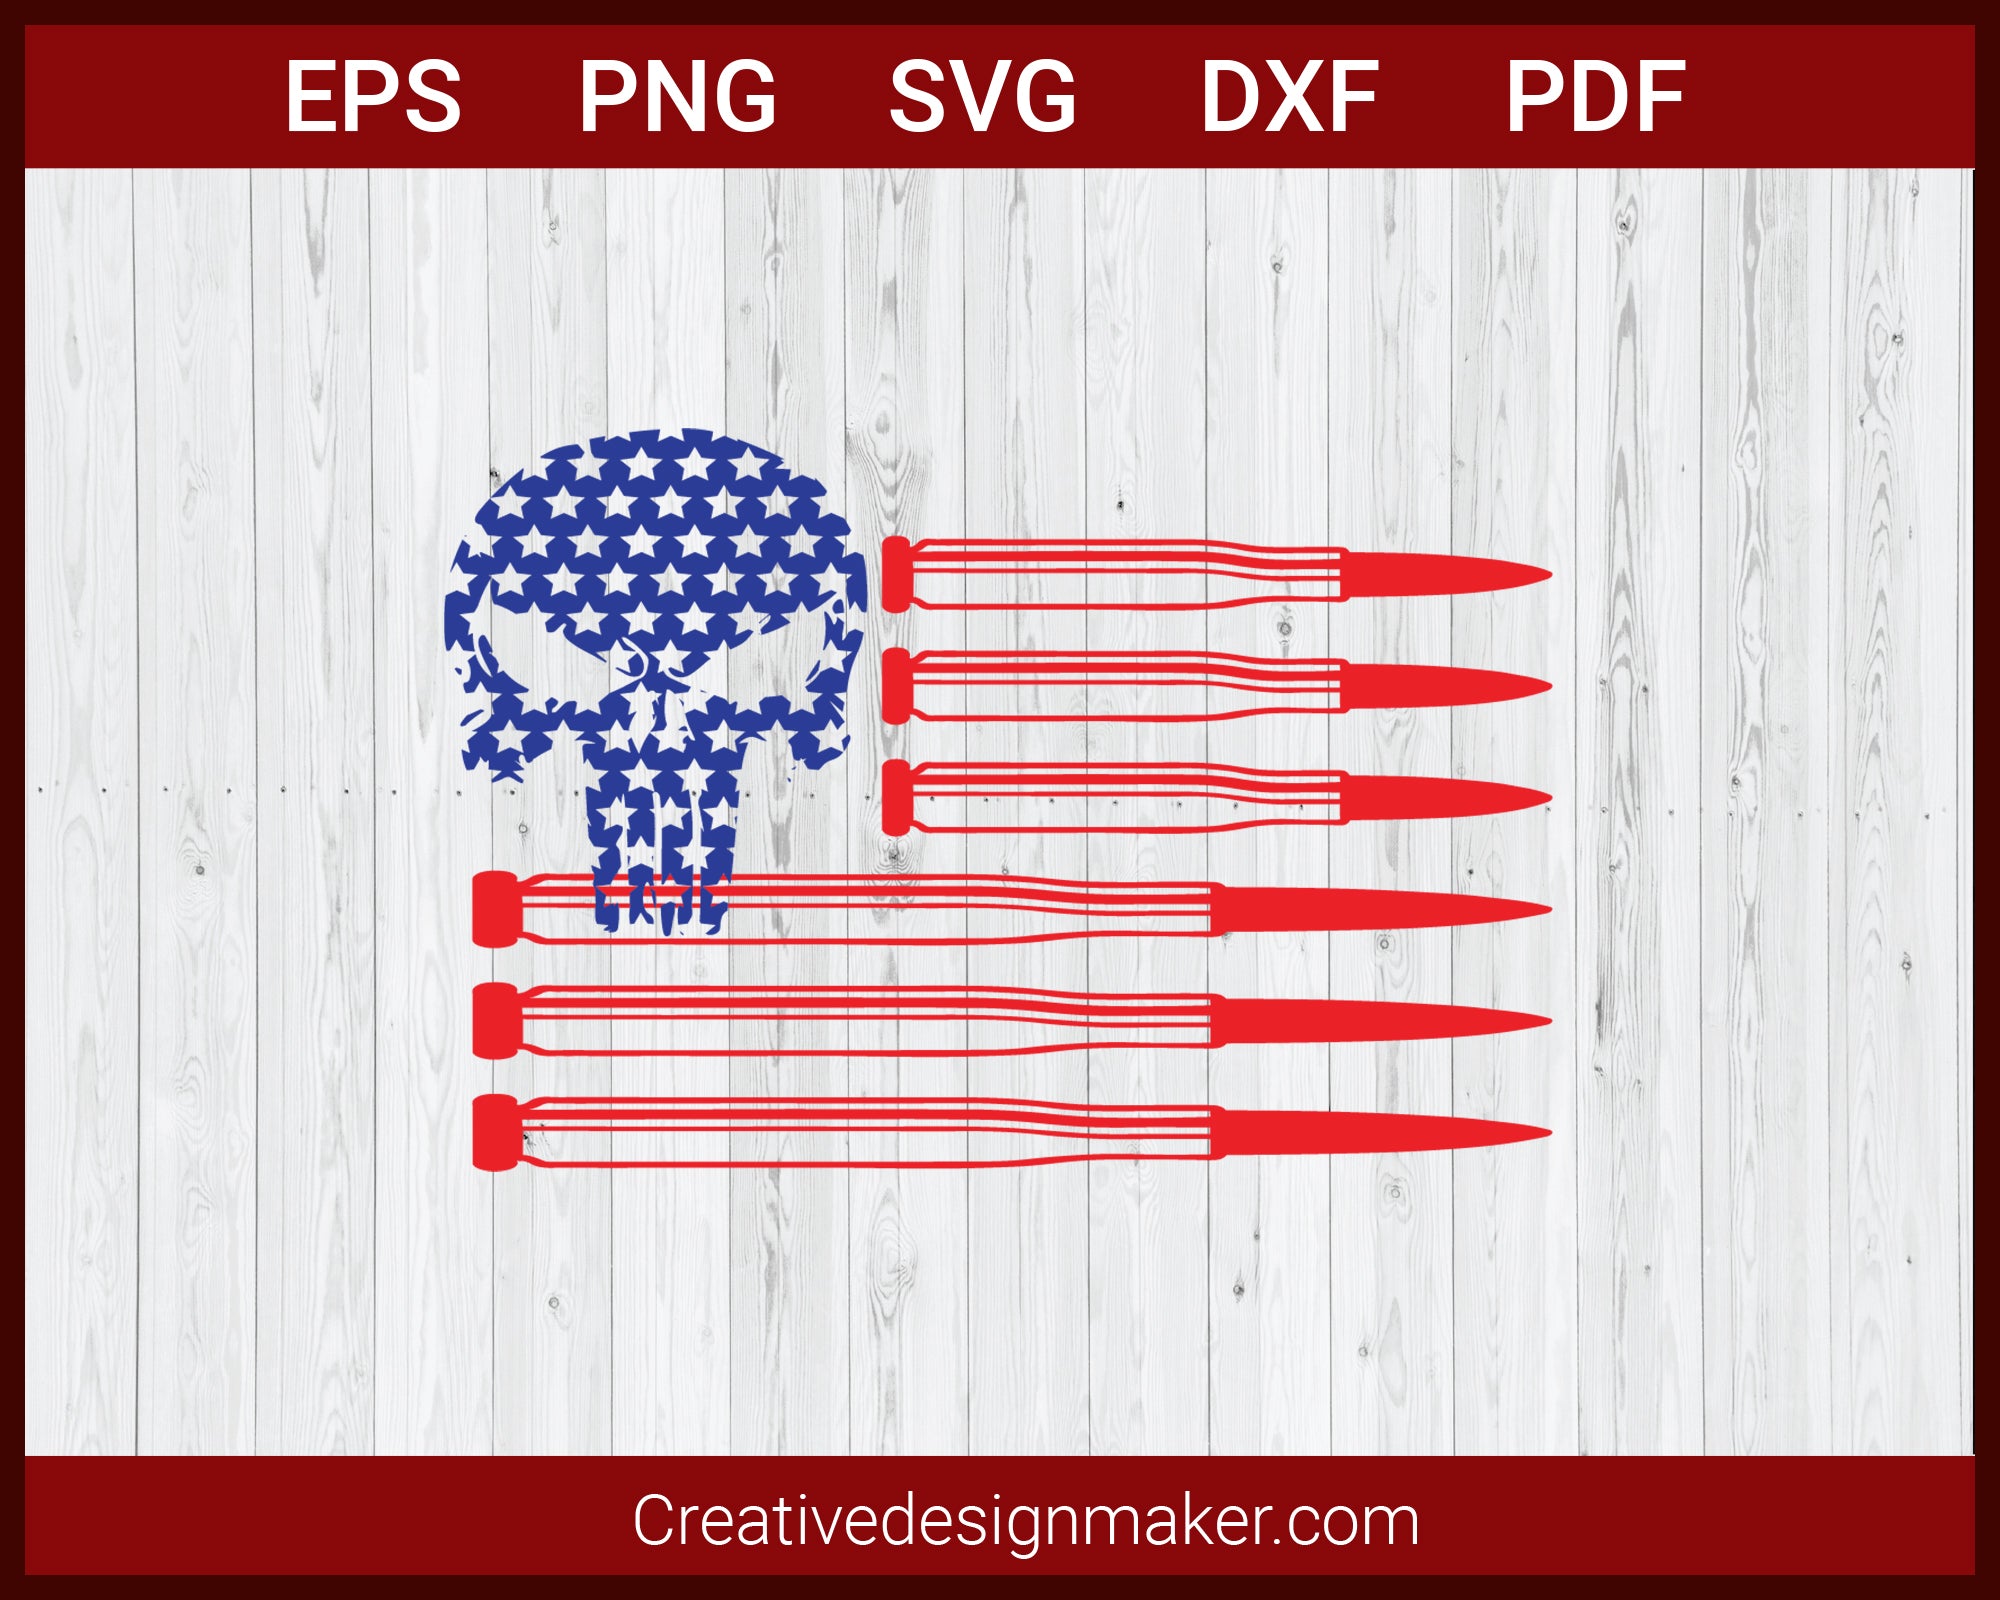 American Flag Punisher Skulls with Guns Bullet SVG Cricut Silhouette DXF PNG EPS Cut File